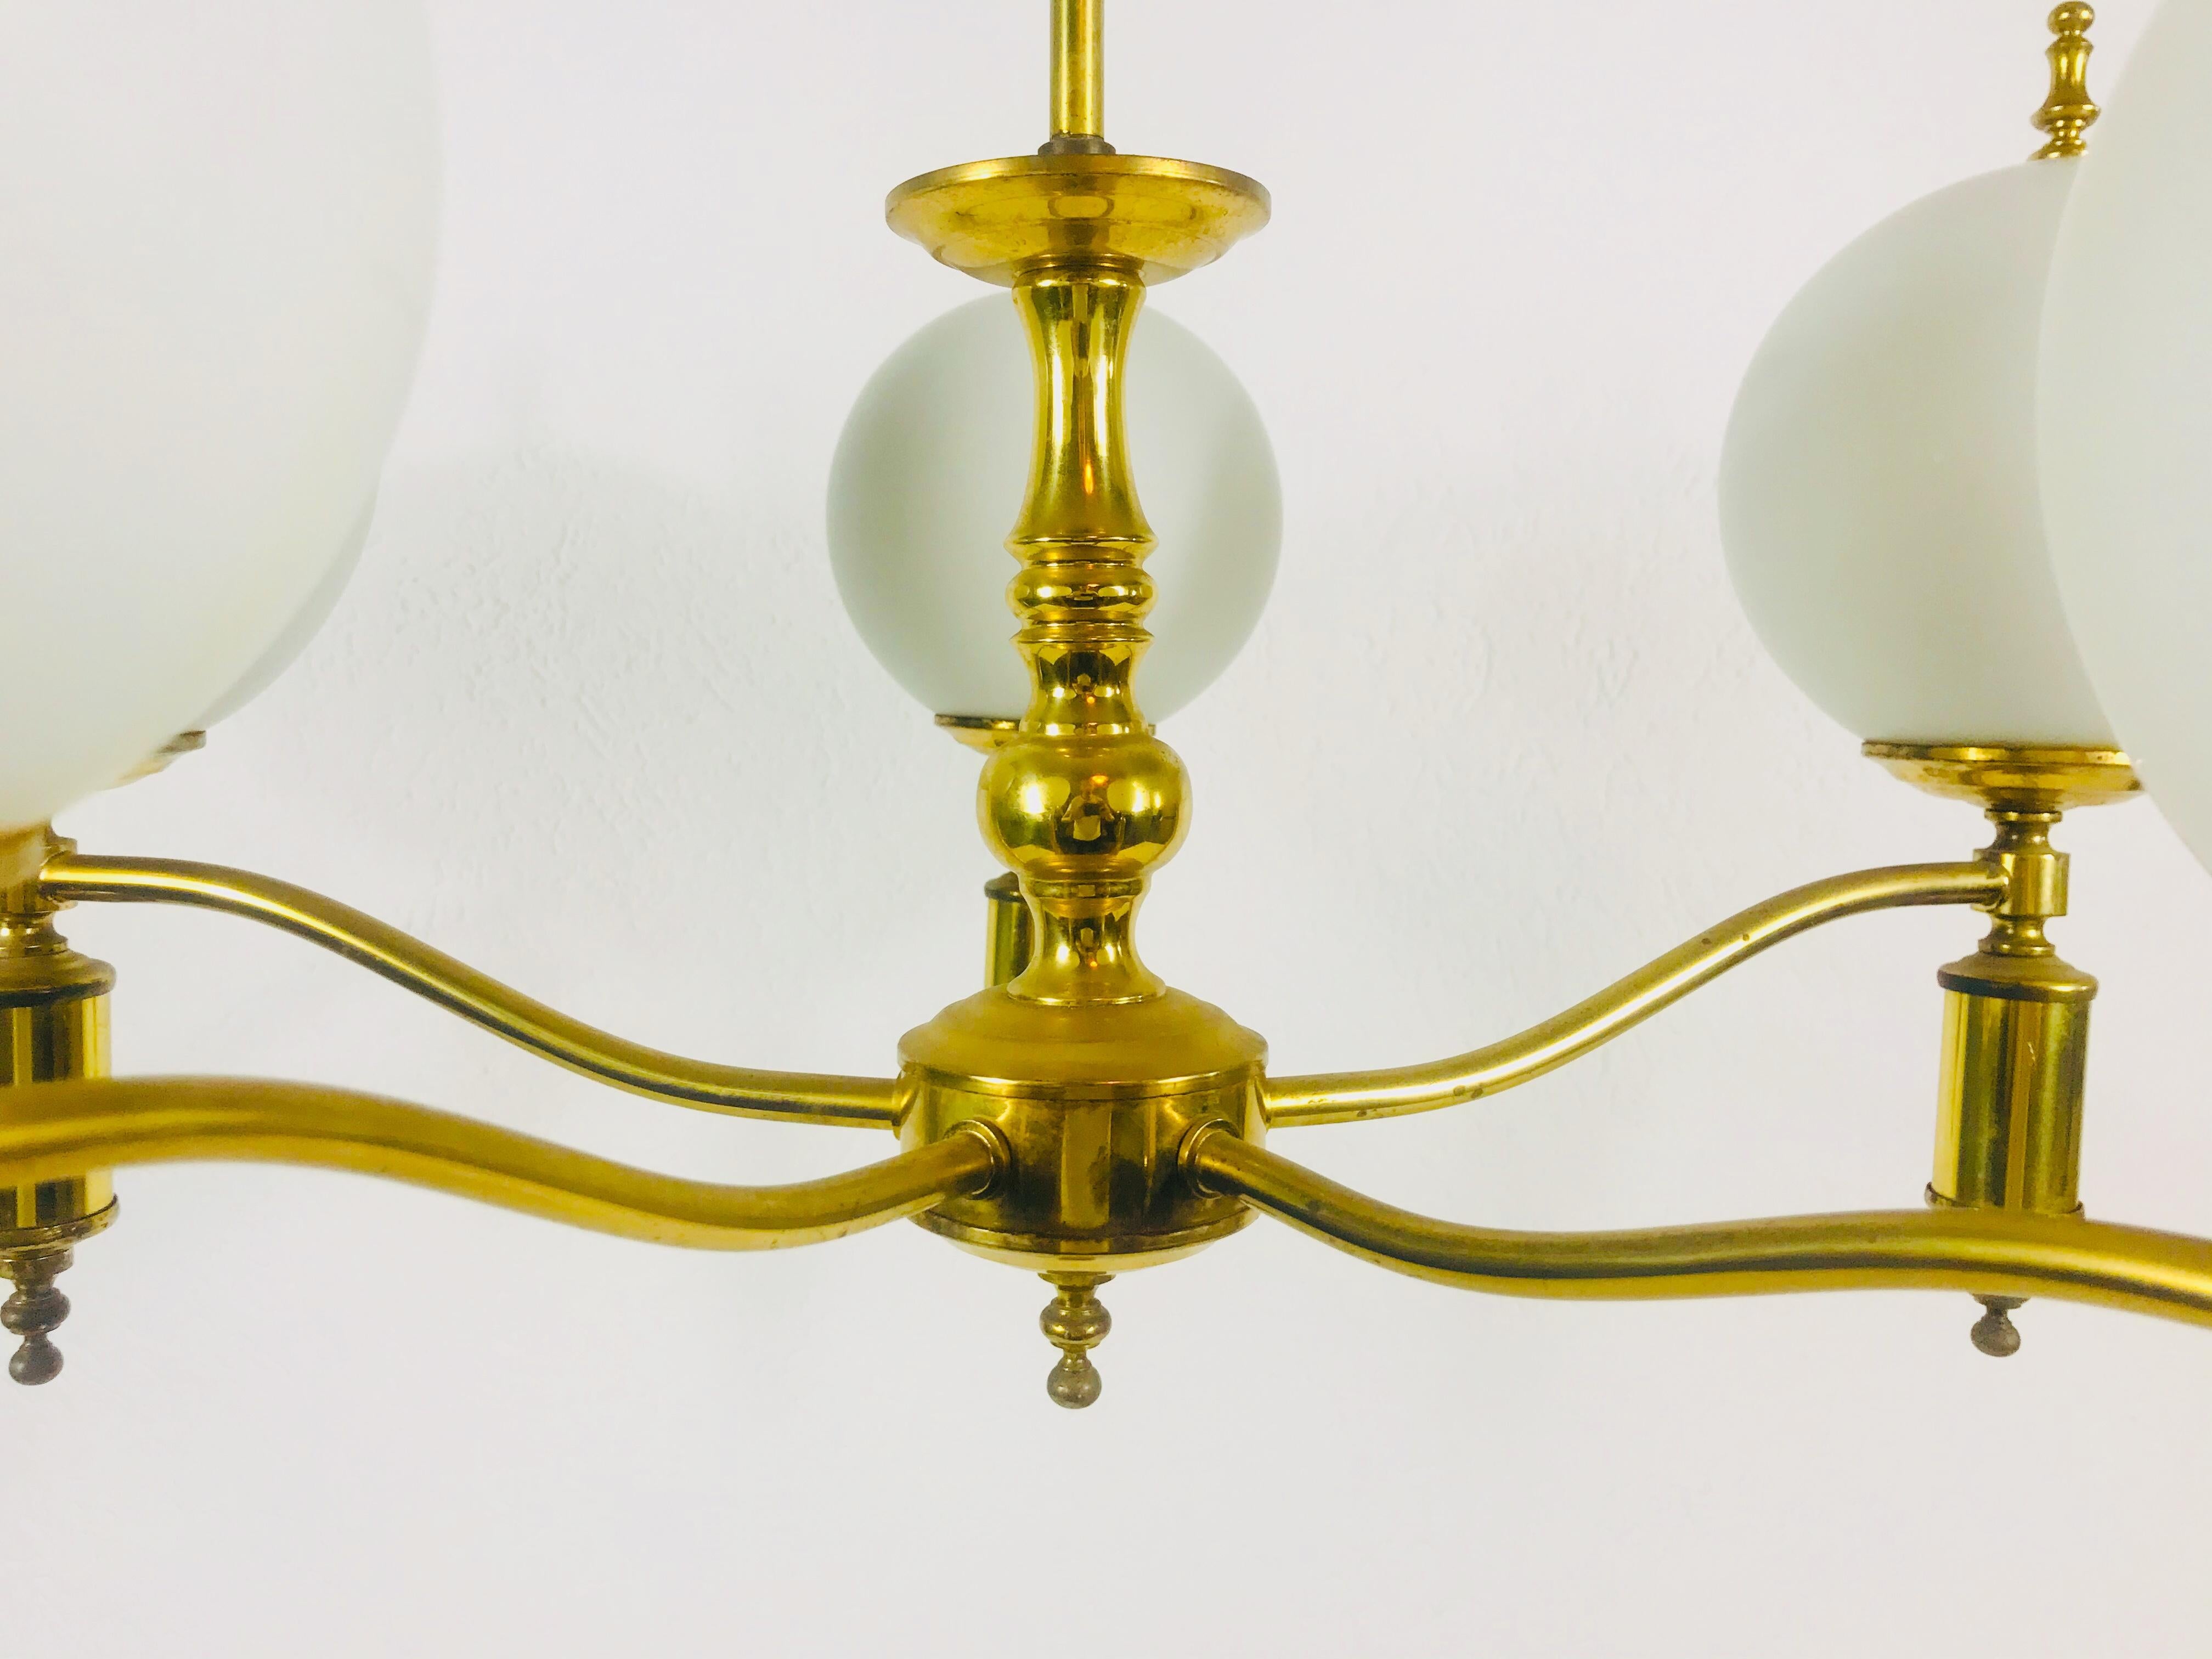 Midcentury Brass Chandelier in the Style of Maison Lunel, 1950s For Sale 2